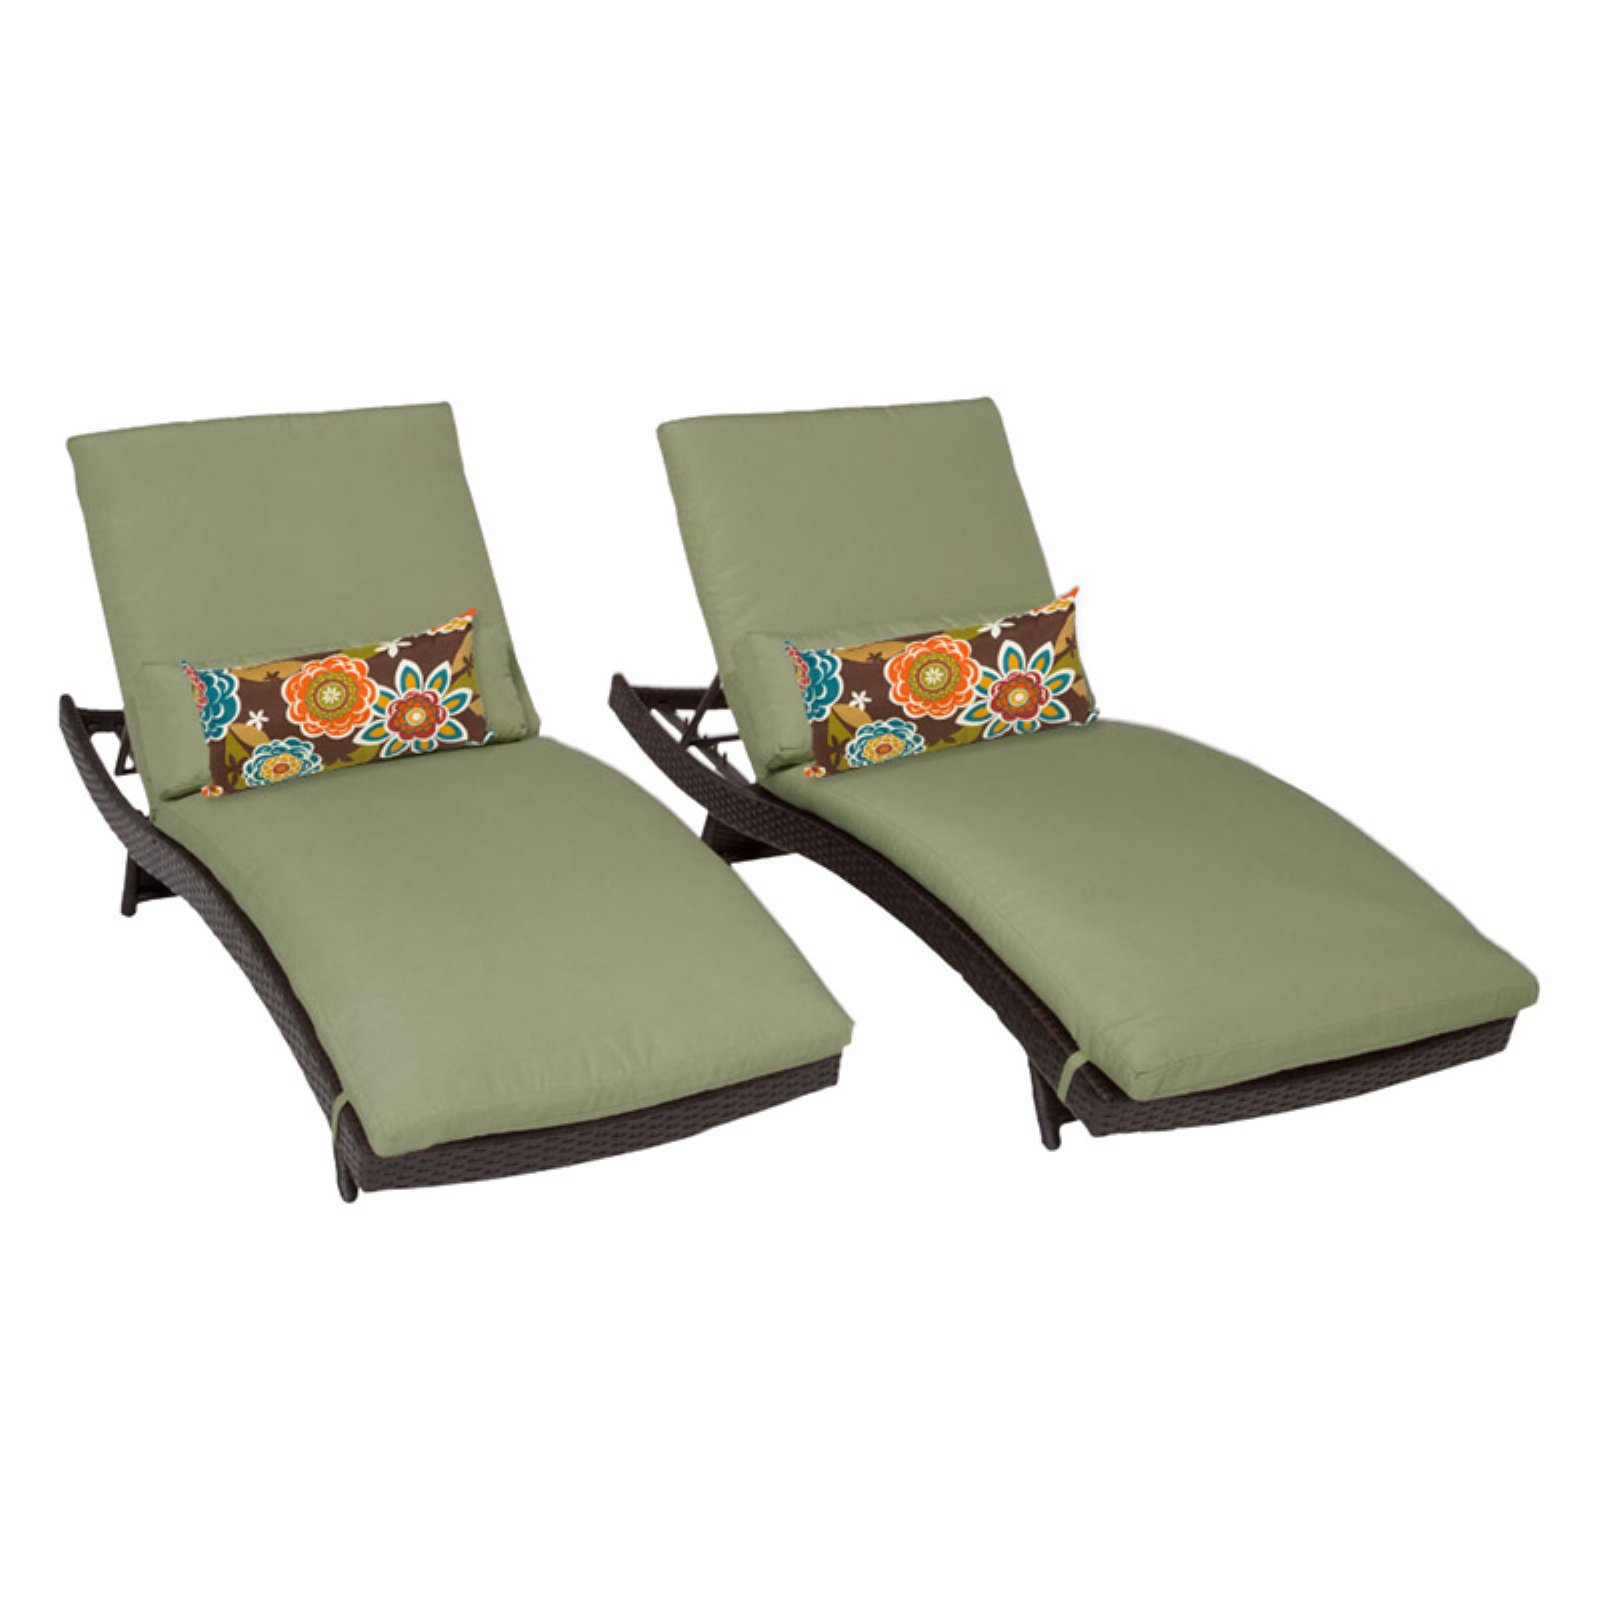 TK Classics Bali Adjustable Outdoor Chaise Lounge - Set of 2 Chairs and Cushion Covers - image 1 of 2